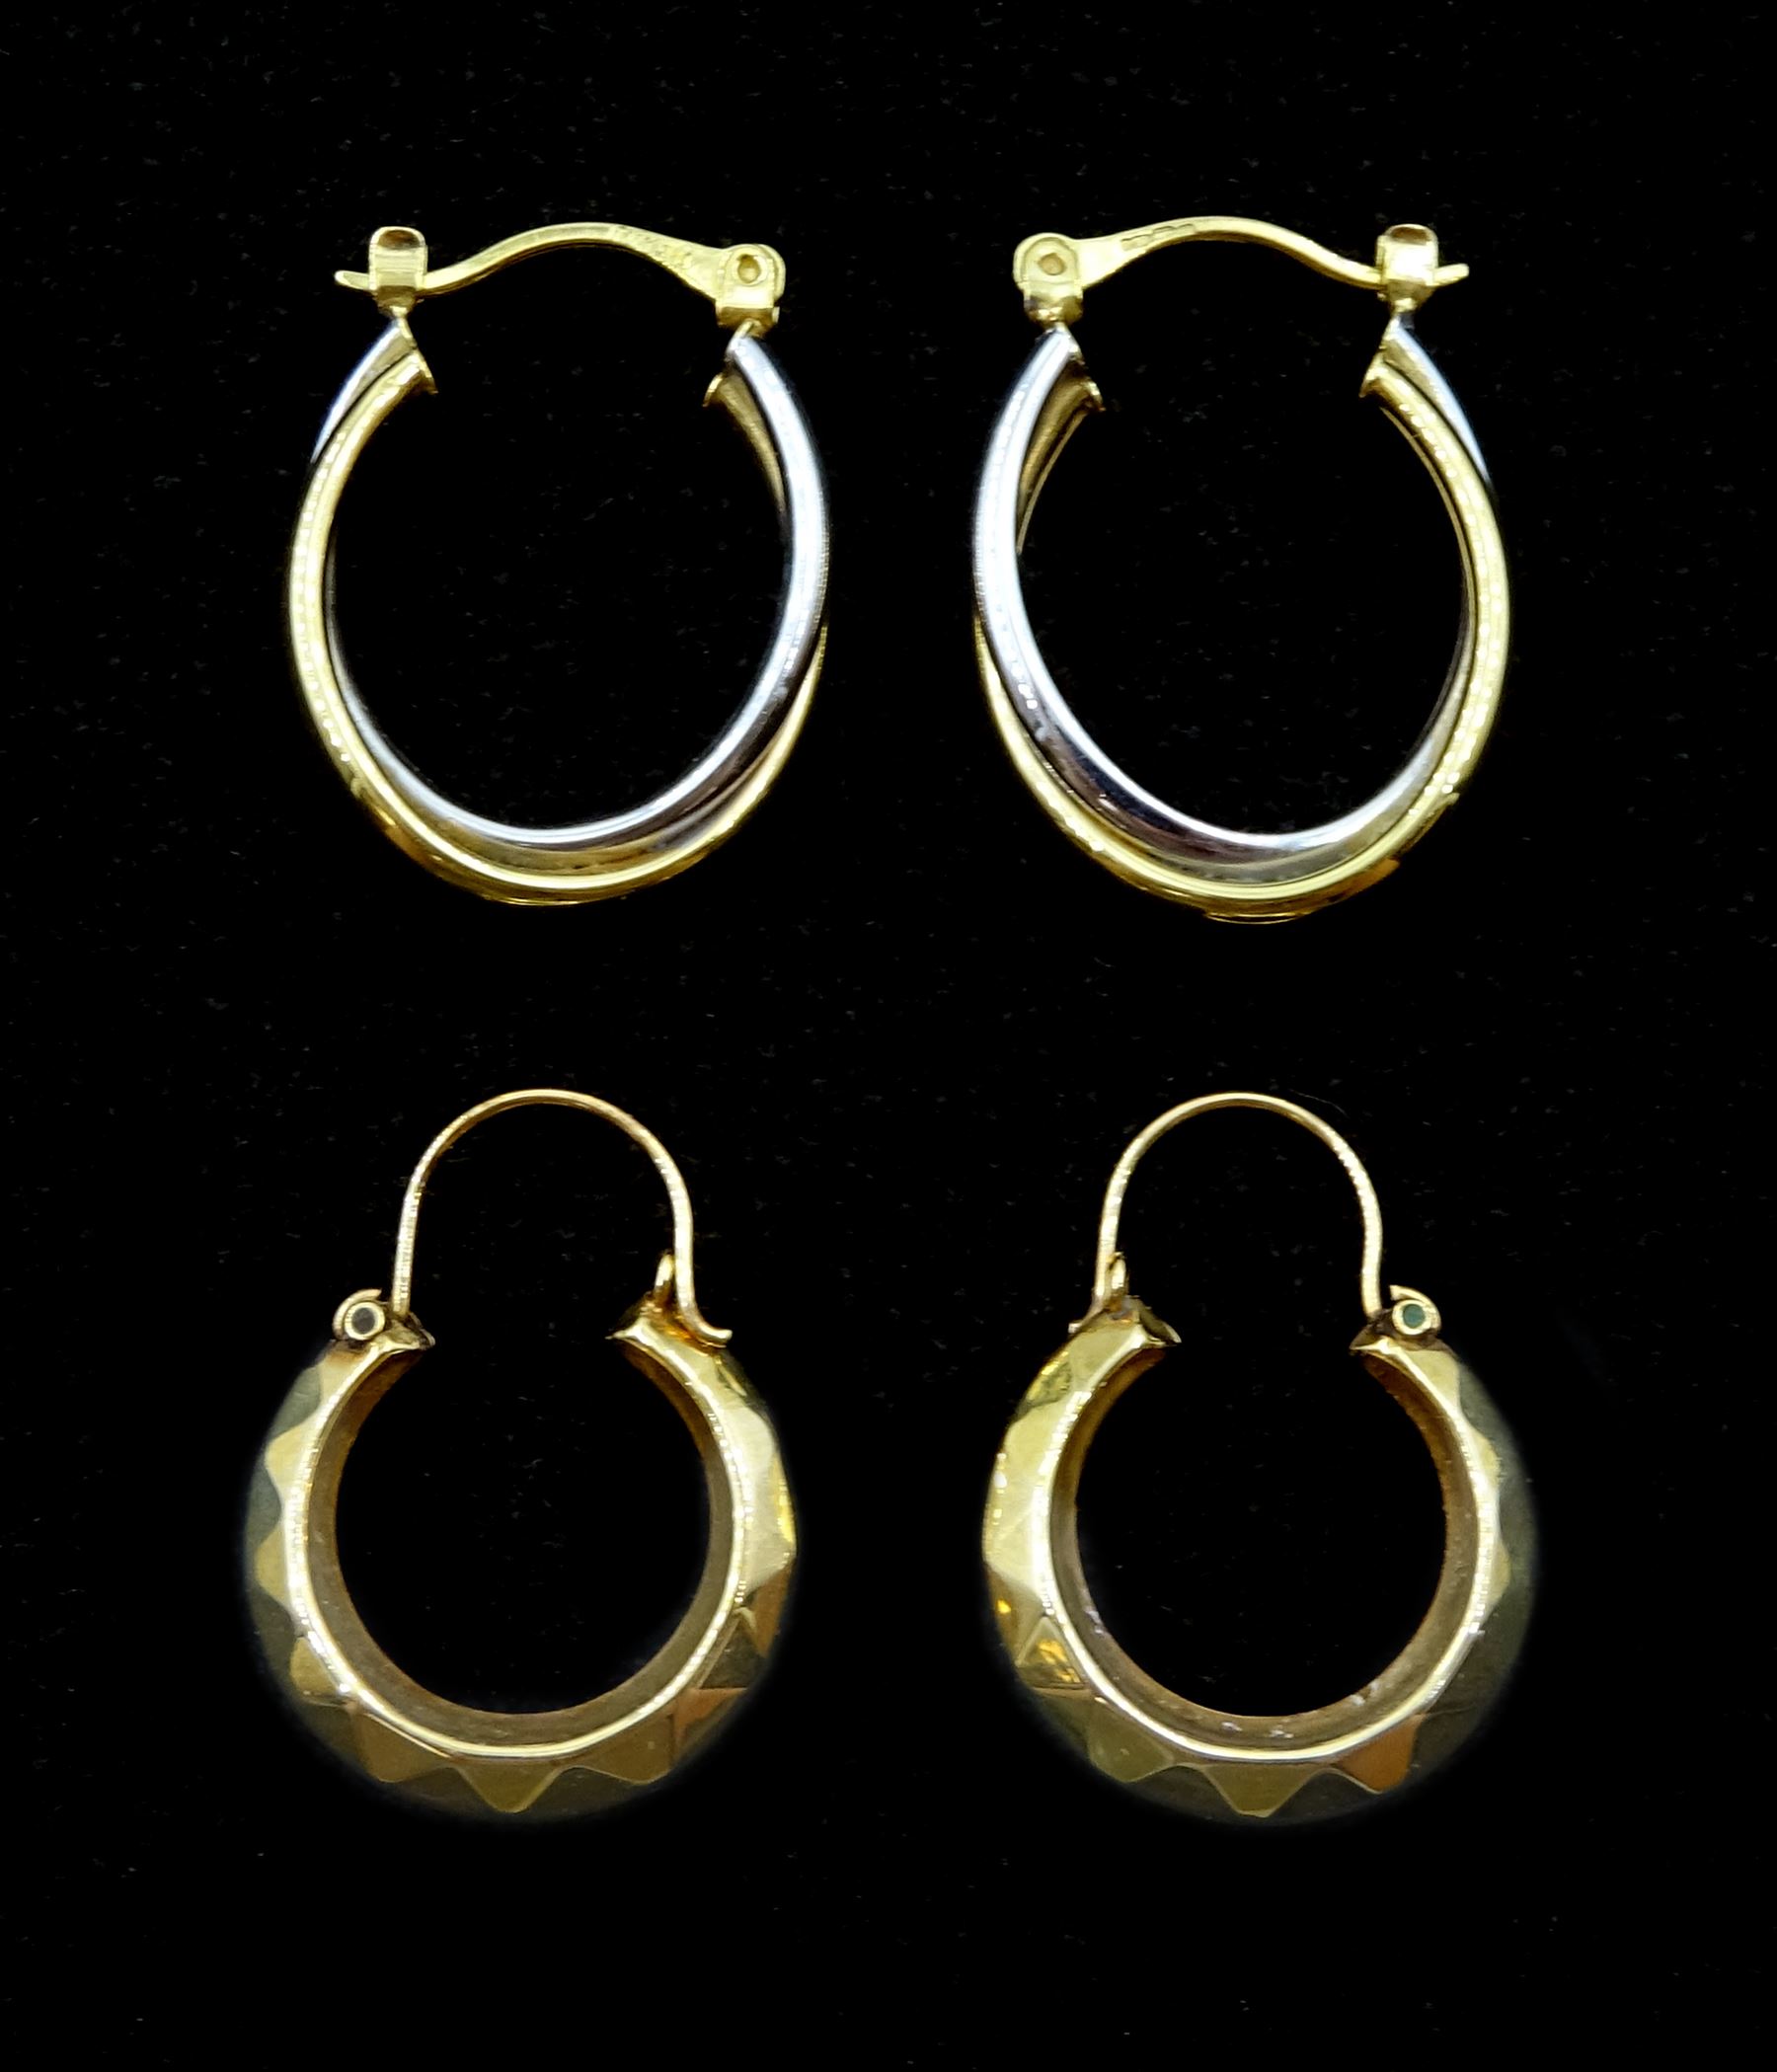 Pair of white and yellow gold hoop earrings and one other pair